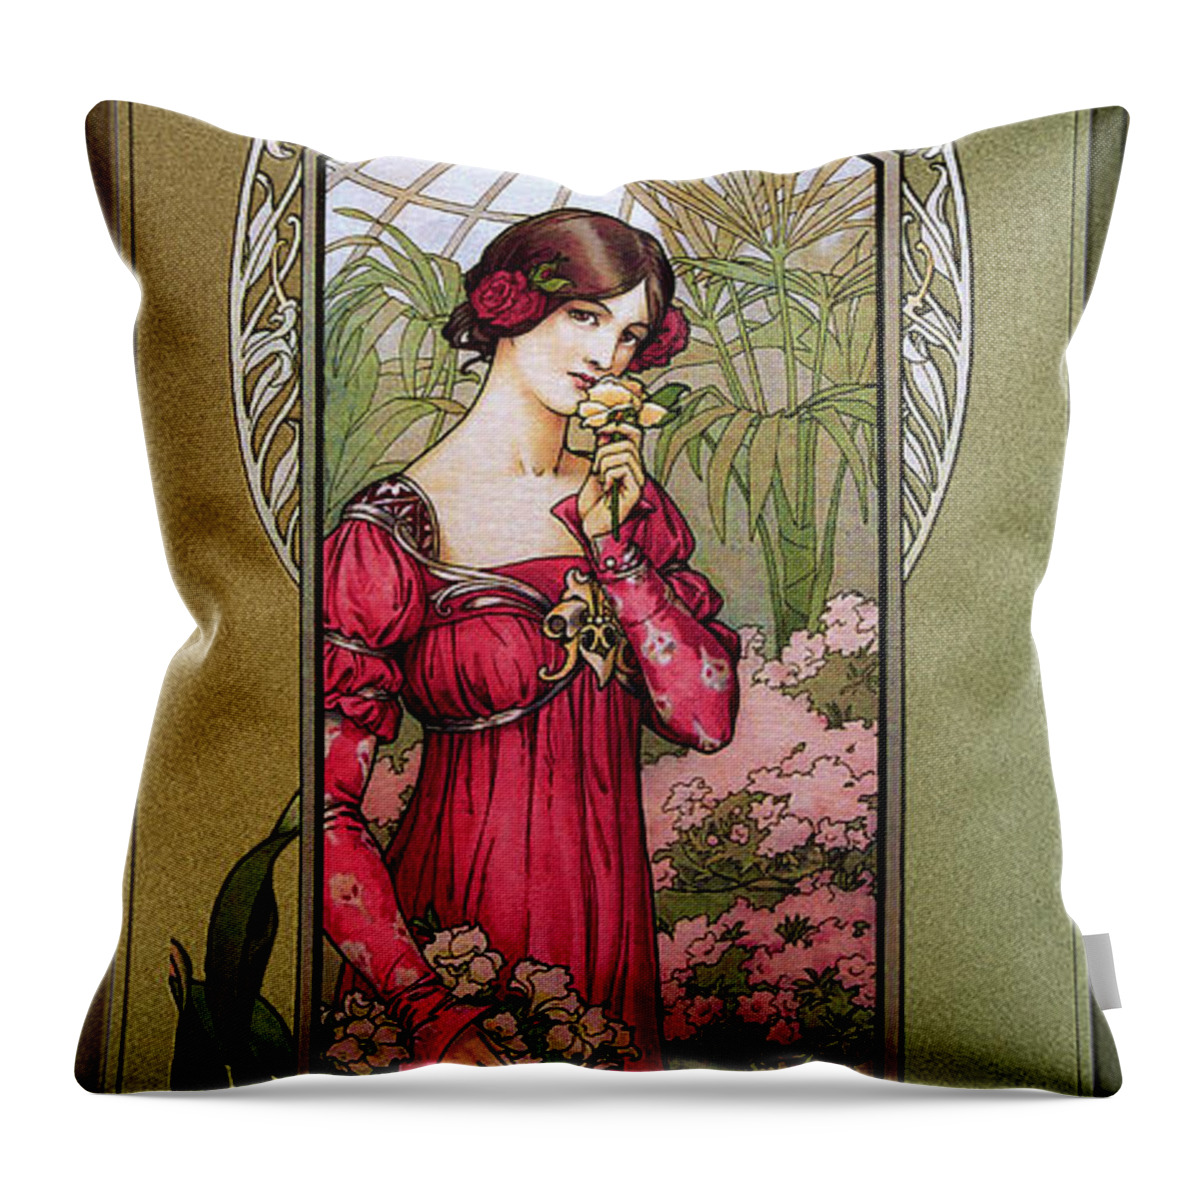 Flowers Of Gardens Throw Pillow featuring the painting Flowers Of Gardens by Elisabeth Sonrel by Rolando Burbon